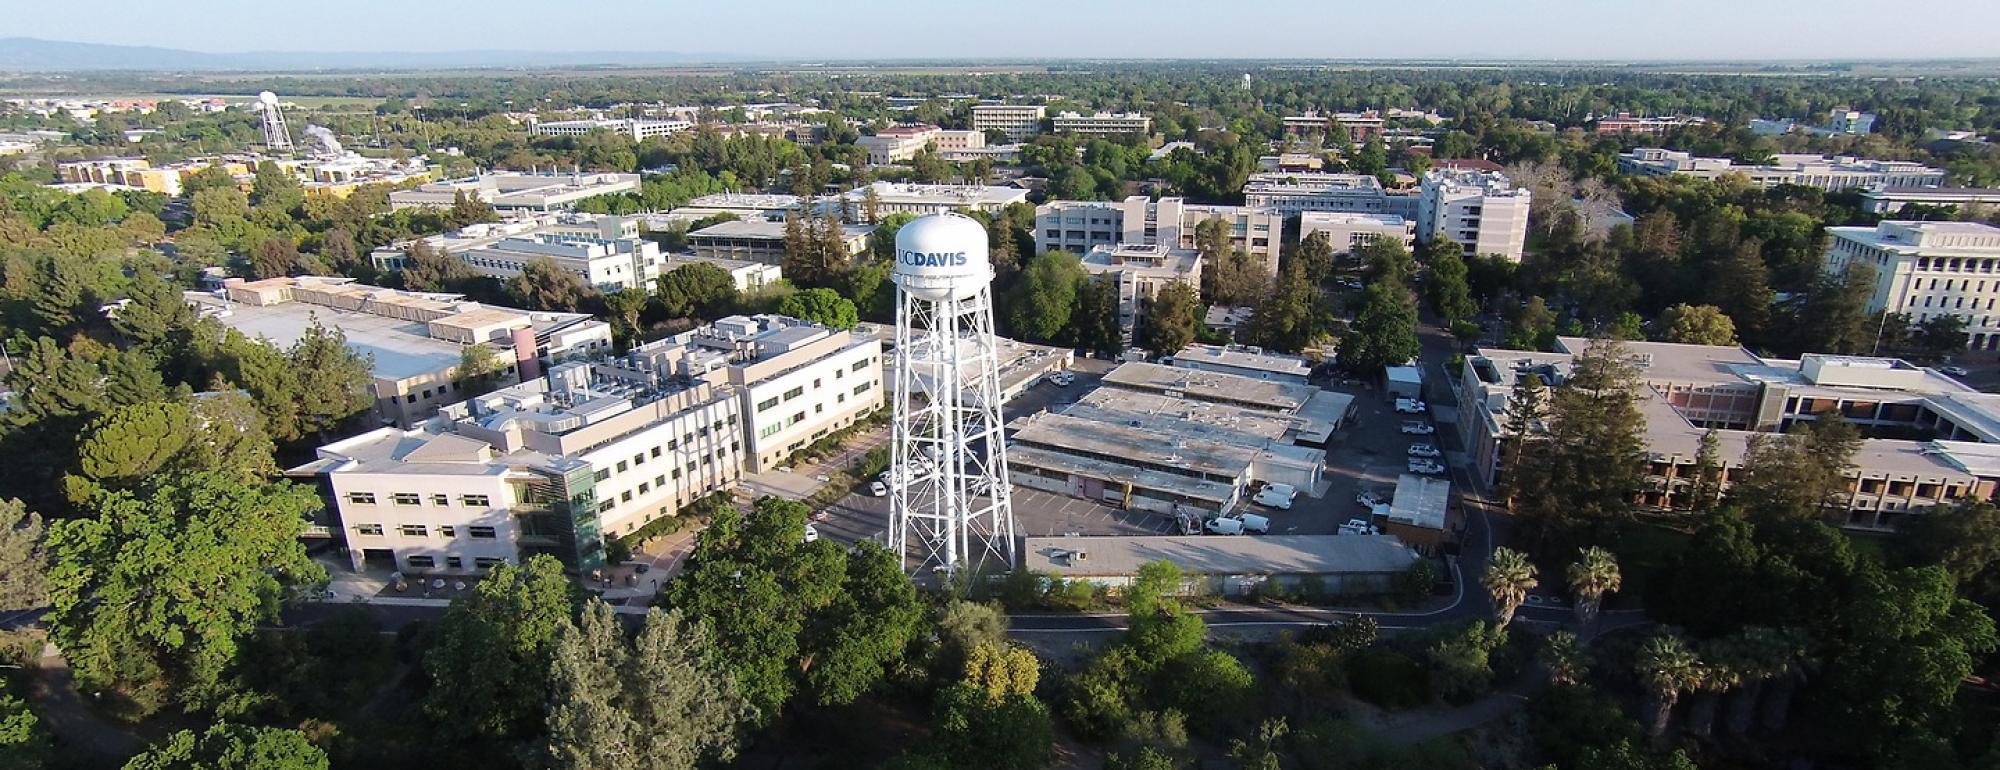 aerial view of the UC Davis campus and water tower